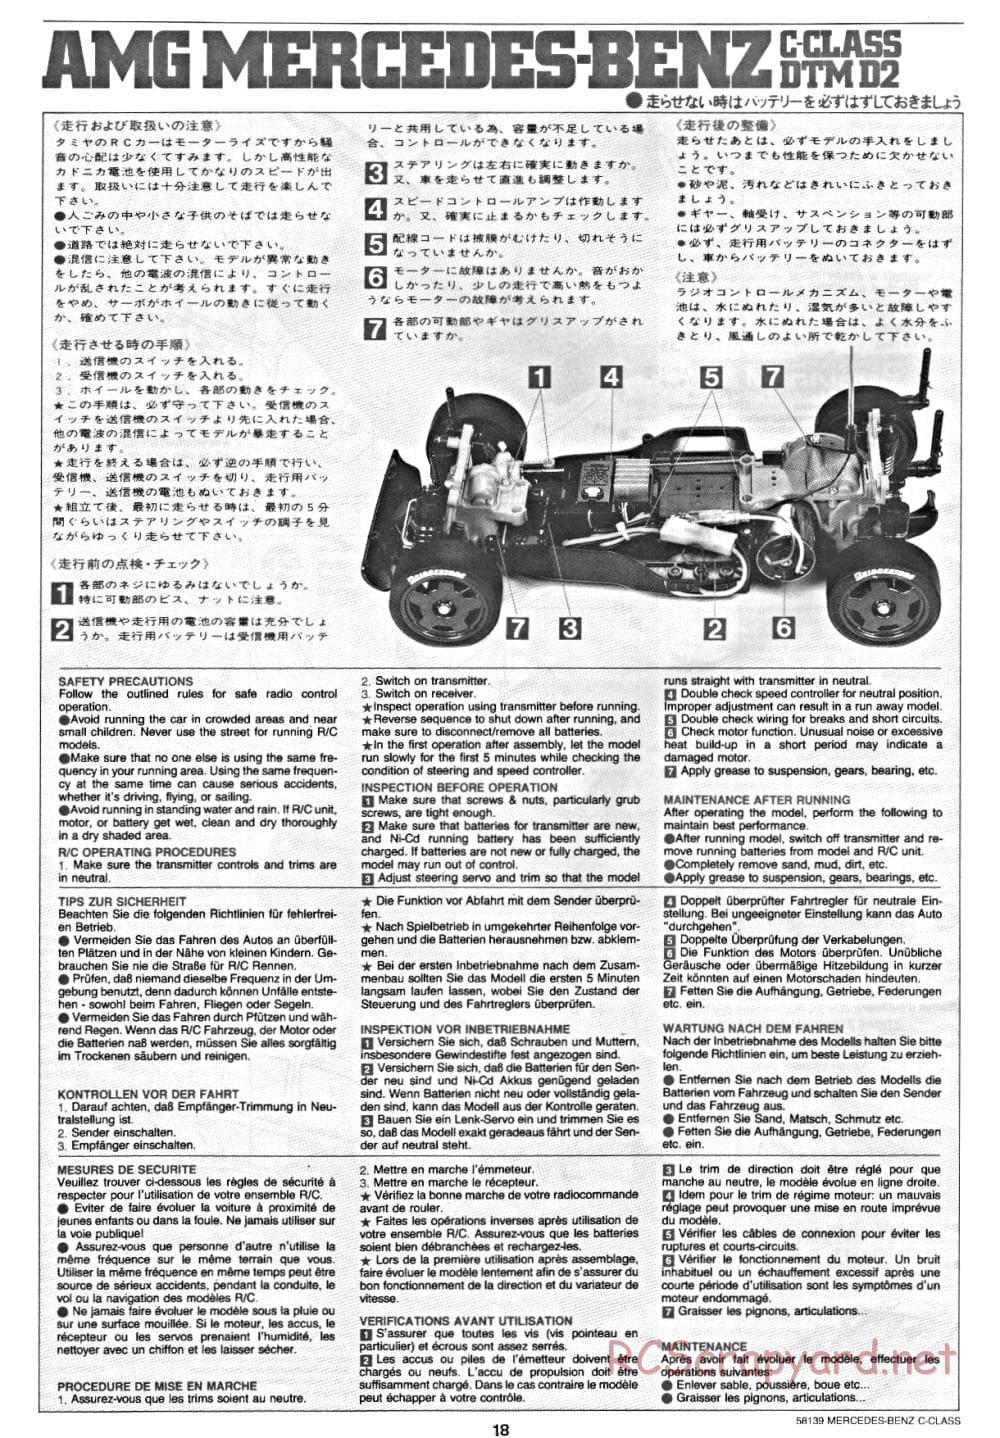 Tamiya - AMG Mercedes-Benz C-Class DTM D2 - TA-02 Chassis - Manual - Page 19